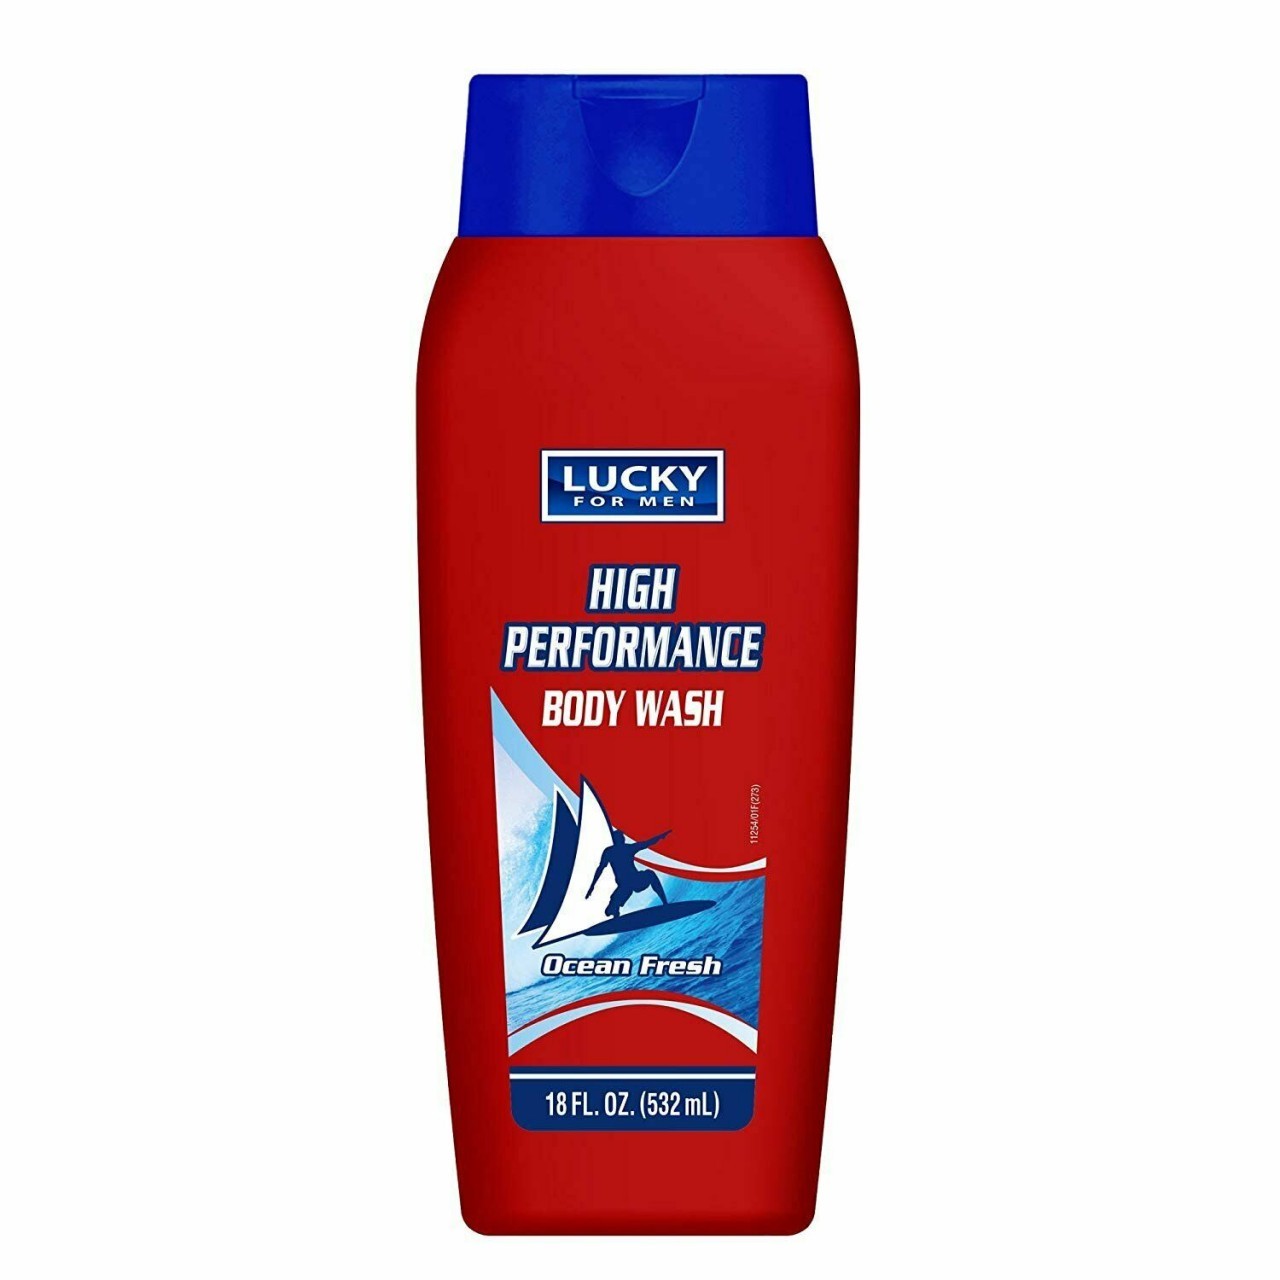 LUCKY BODY WASH FOR MEN H/PERFORM 18oz